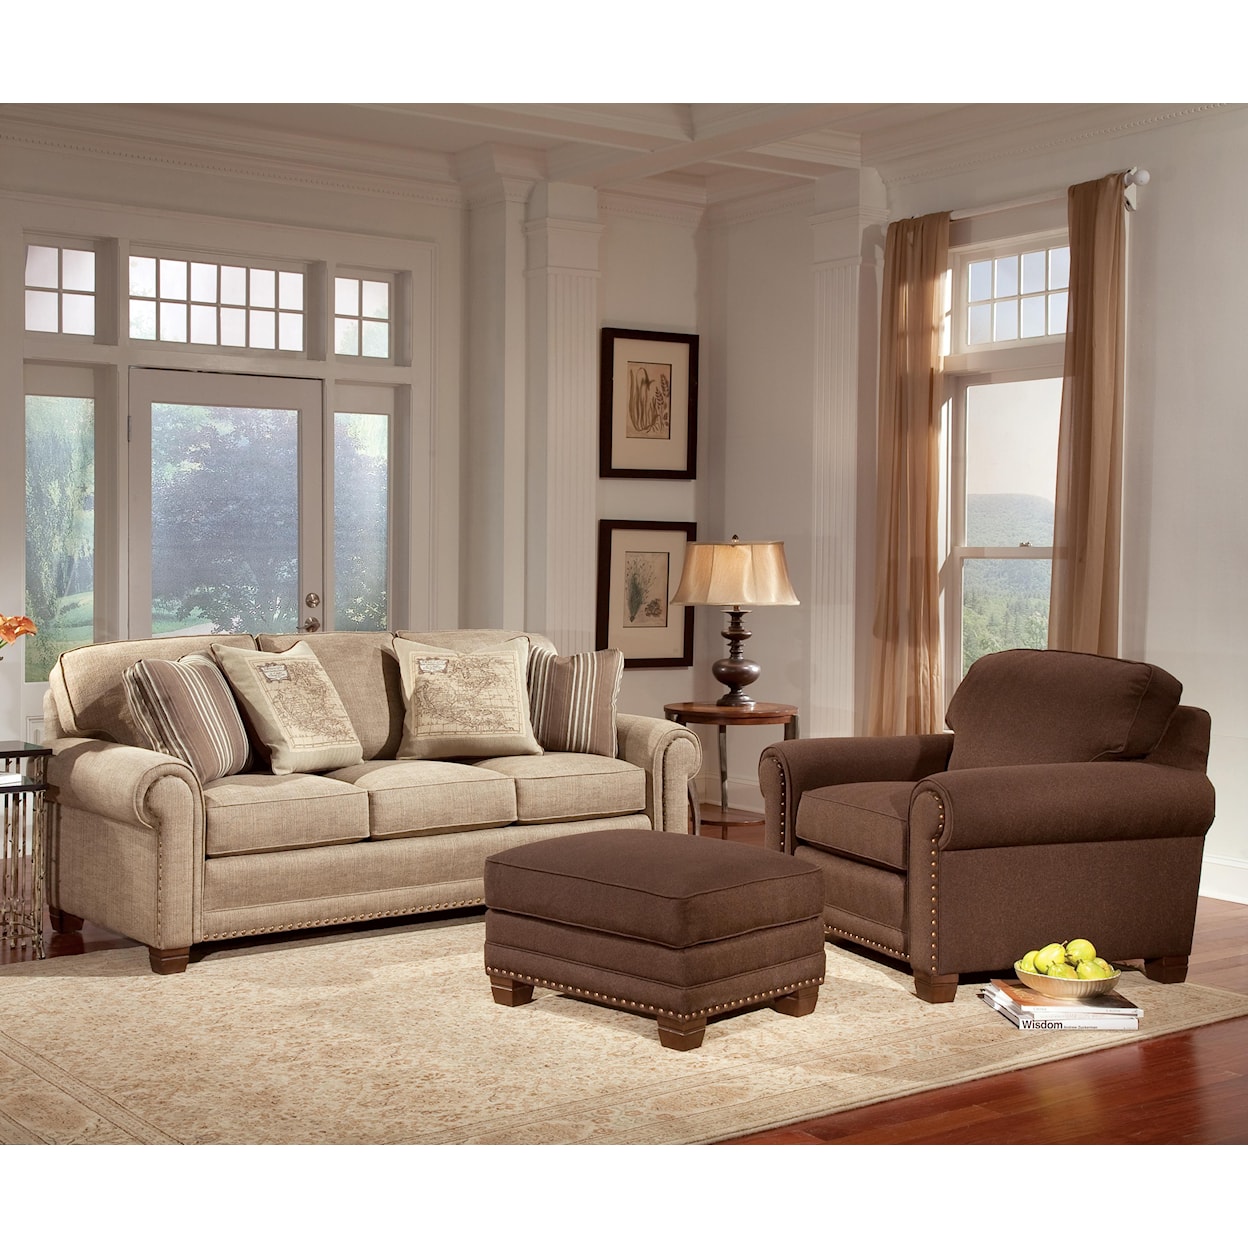 Smith Brothers 393 Traditional Ottoman